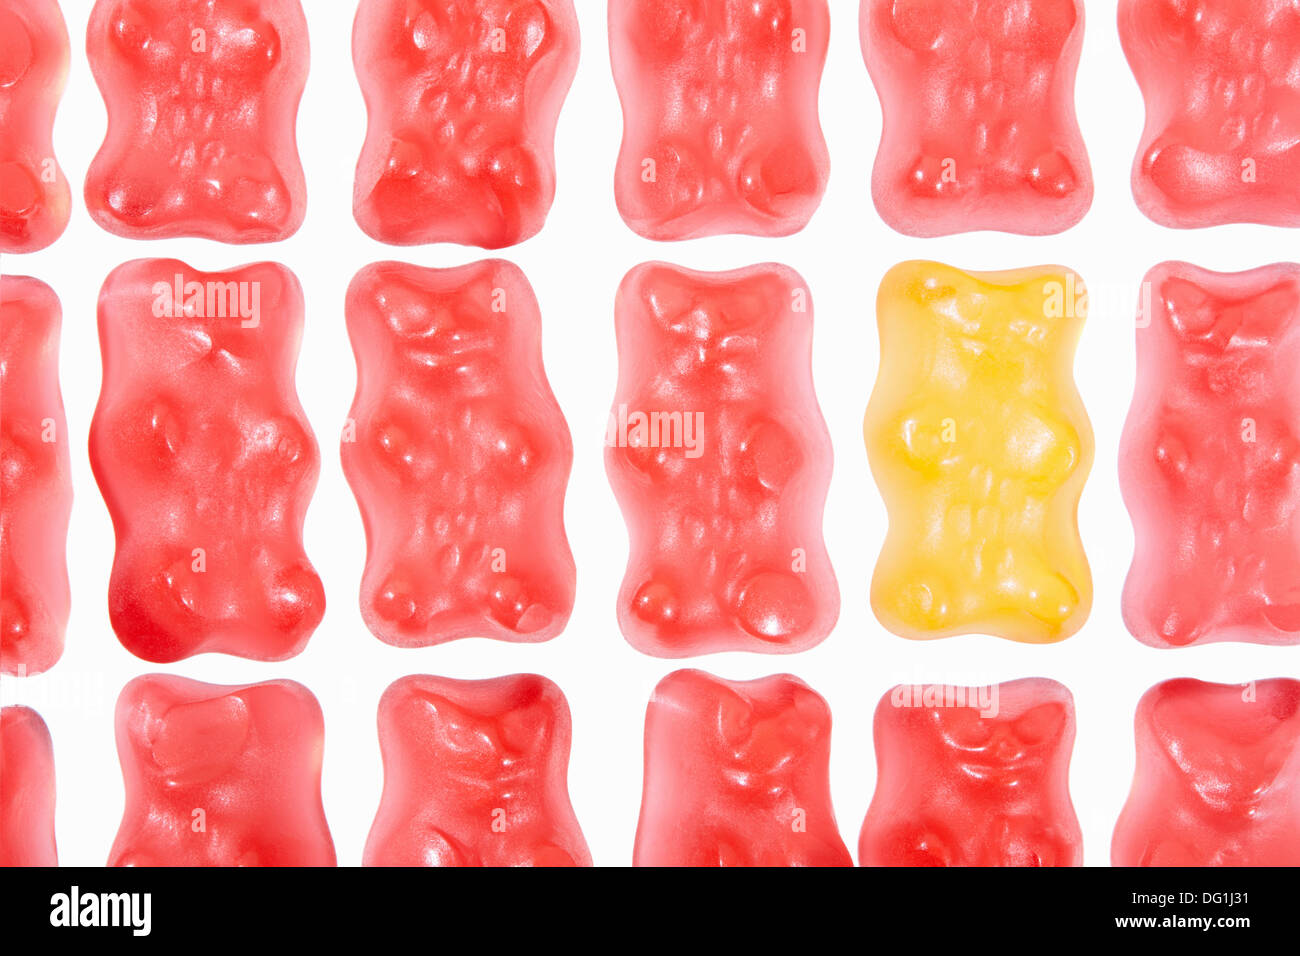 Gummy bears individuality concept isolated on white Stock Photo